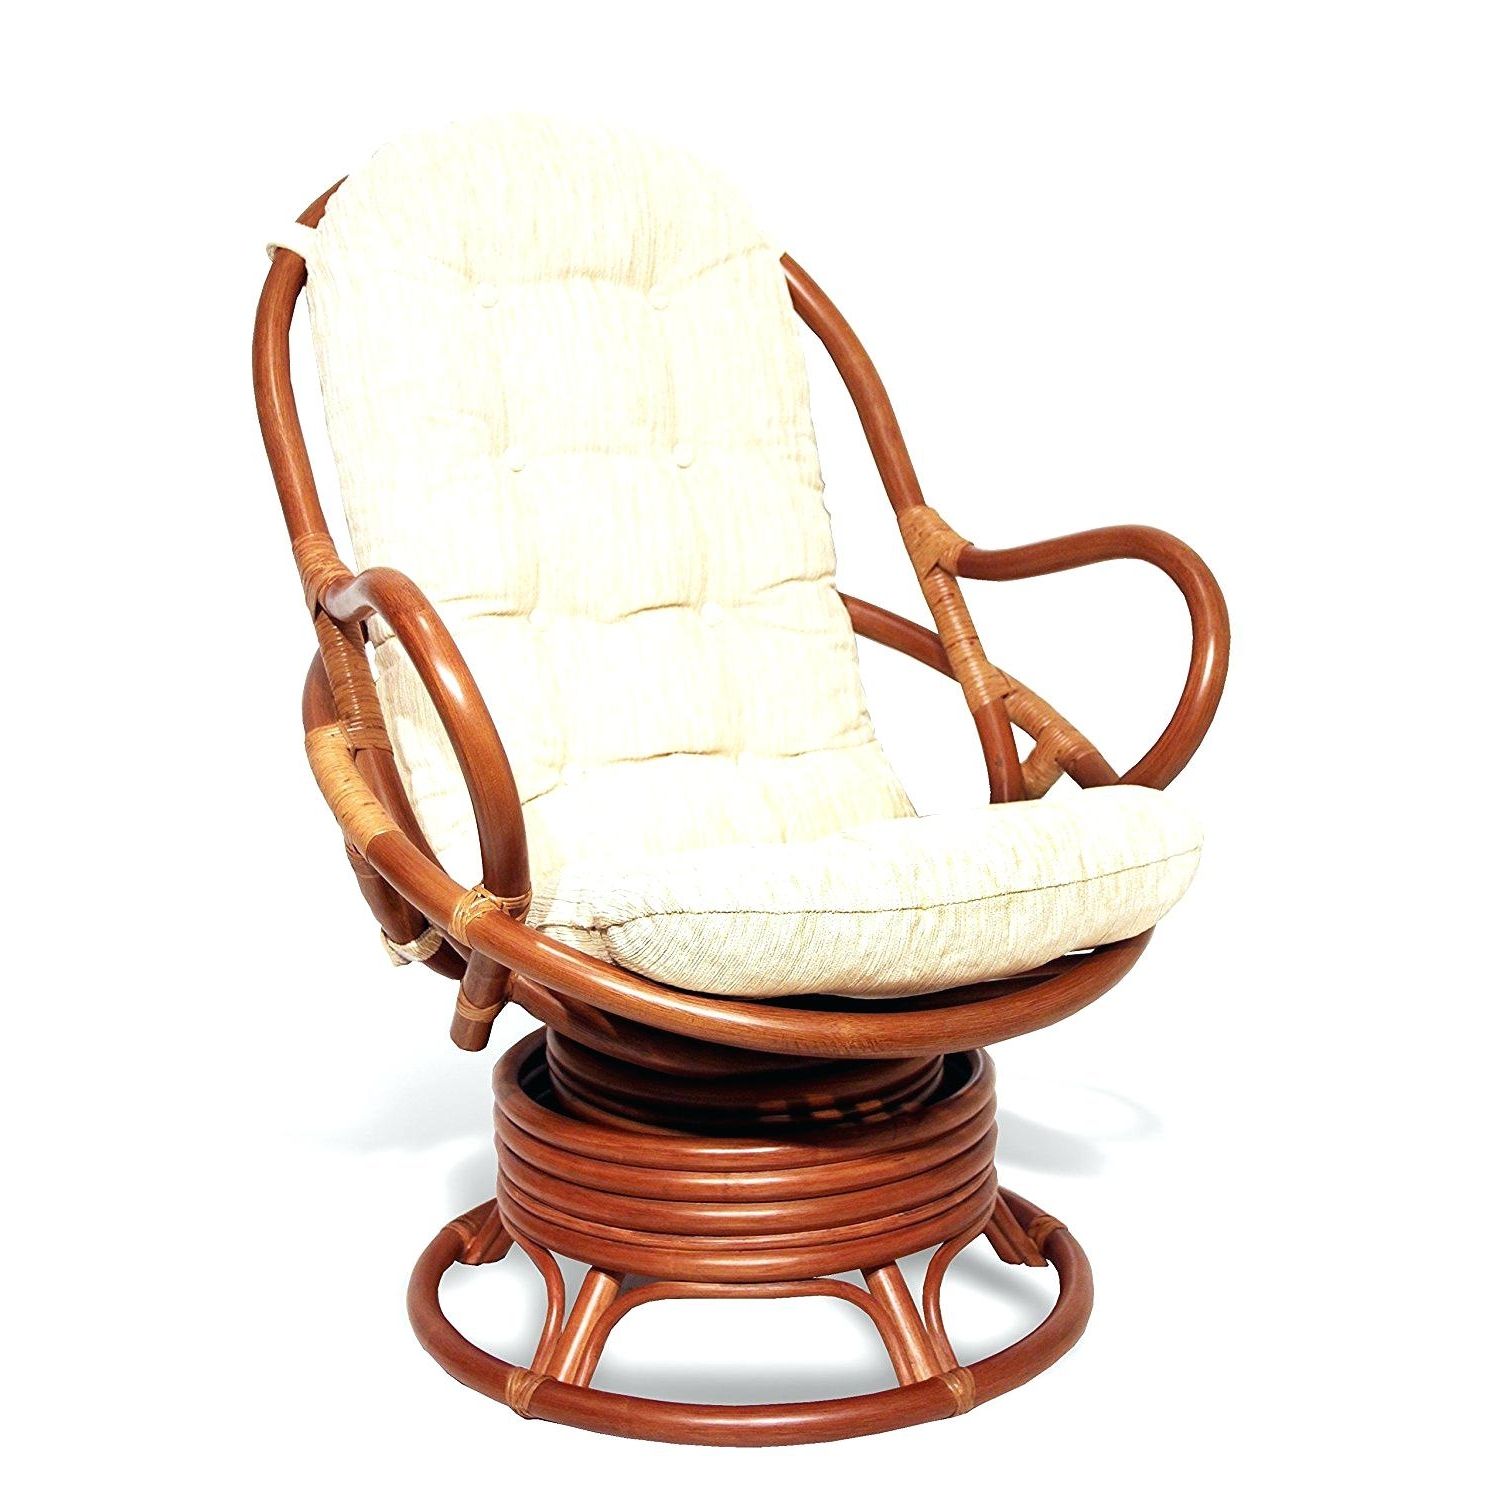 Outdoor Wicker Rocking Chairs With Cushions Intended For Most Current Cushion : Wicker Rocking Chair Followfirefish Com Cushions Cushion (View 15 of 20)